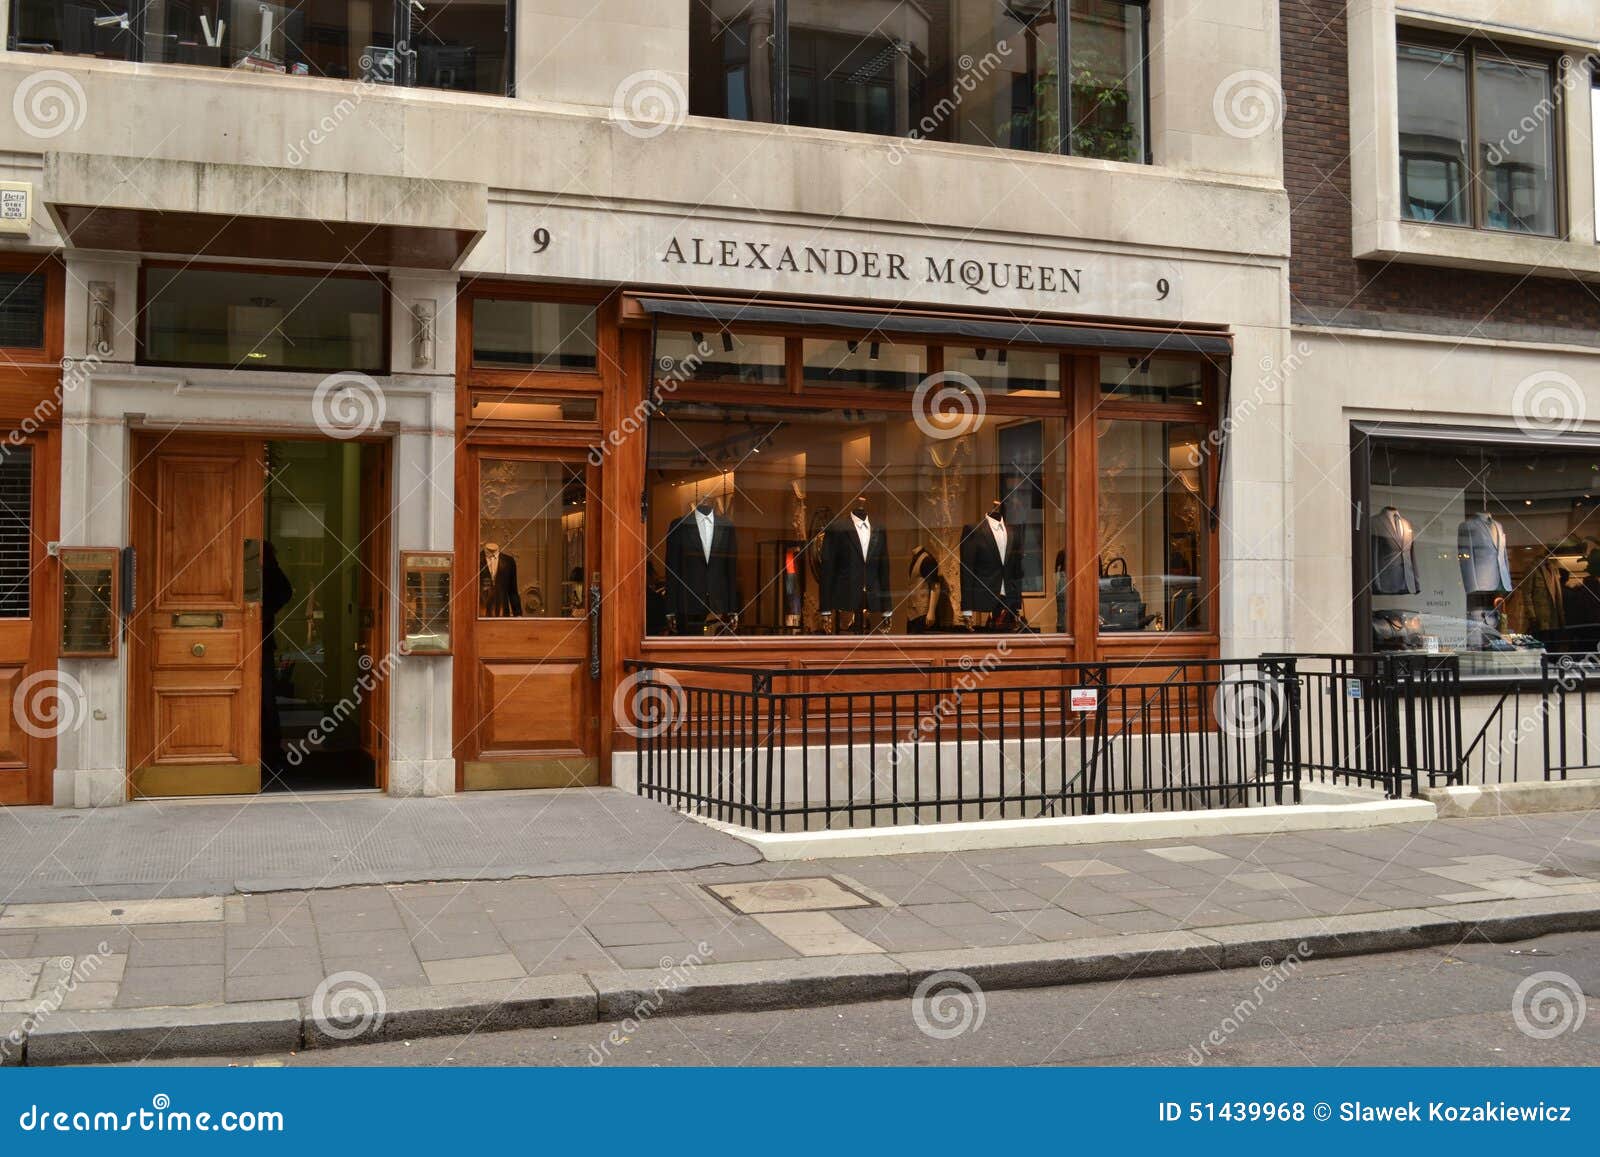 Alexander McQueen's New Store is a Hub for London's Students